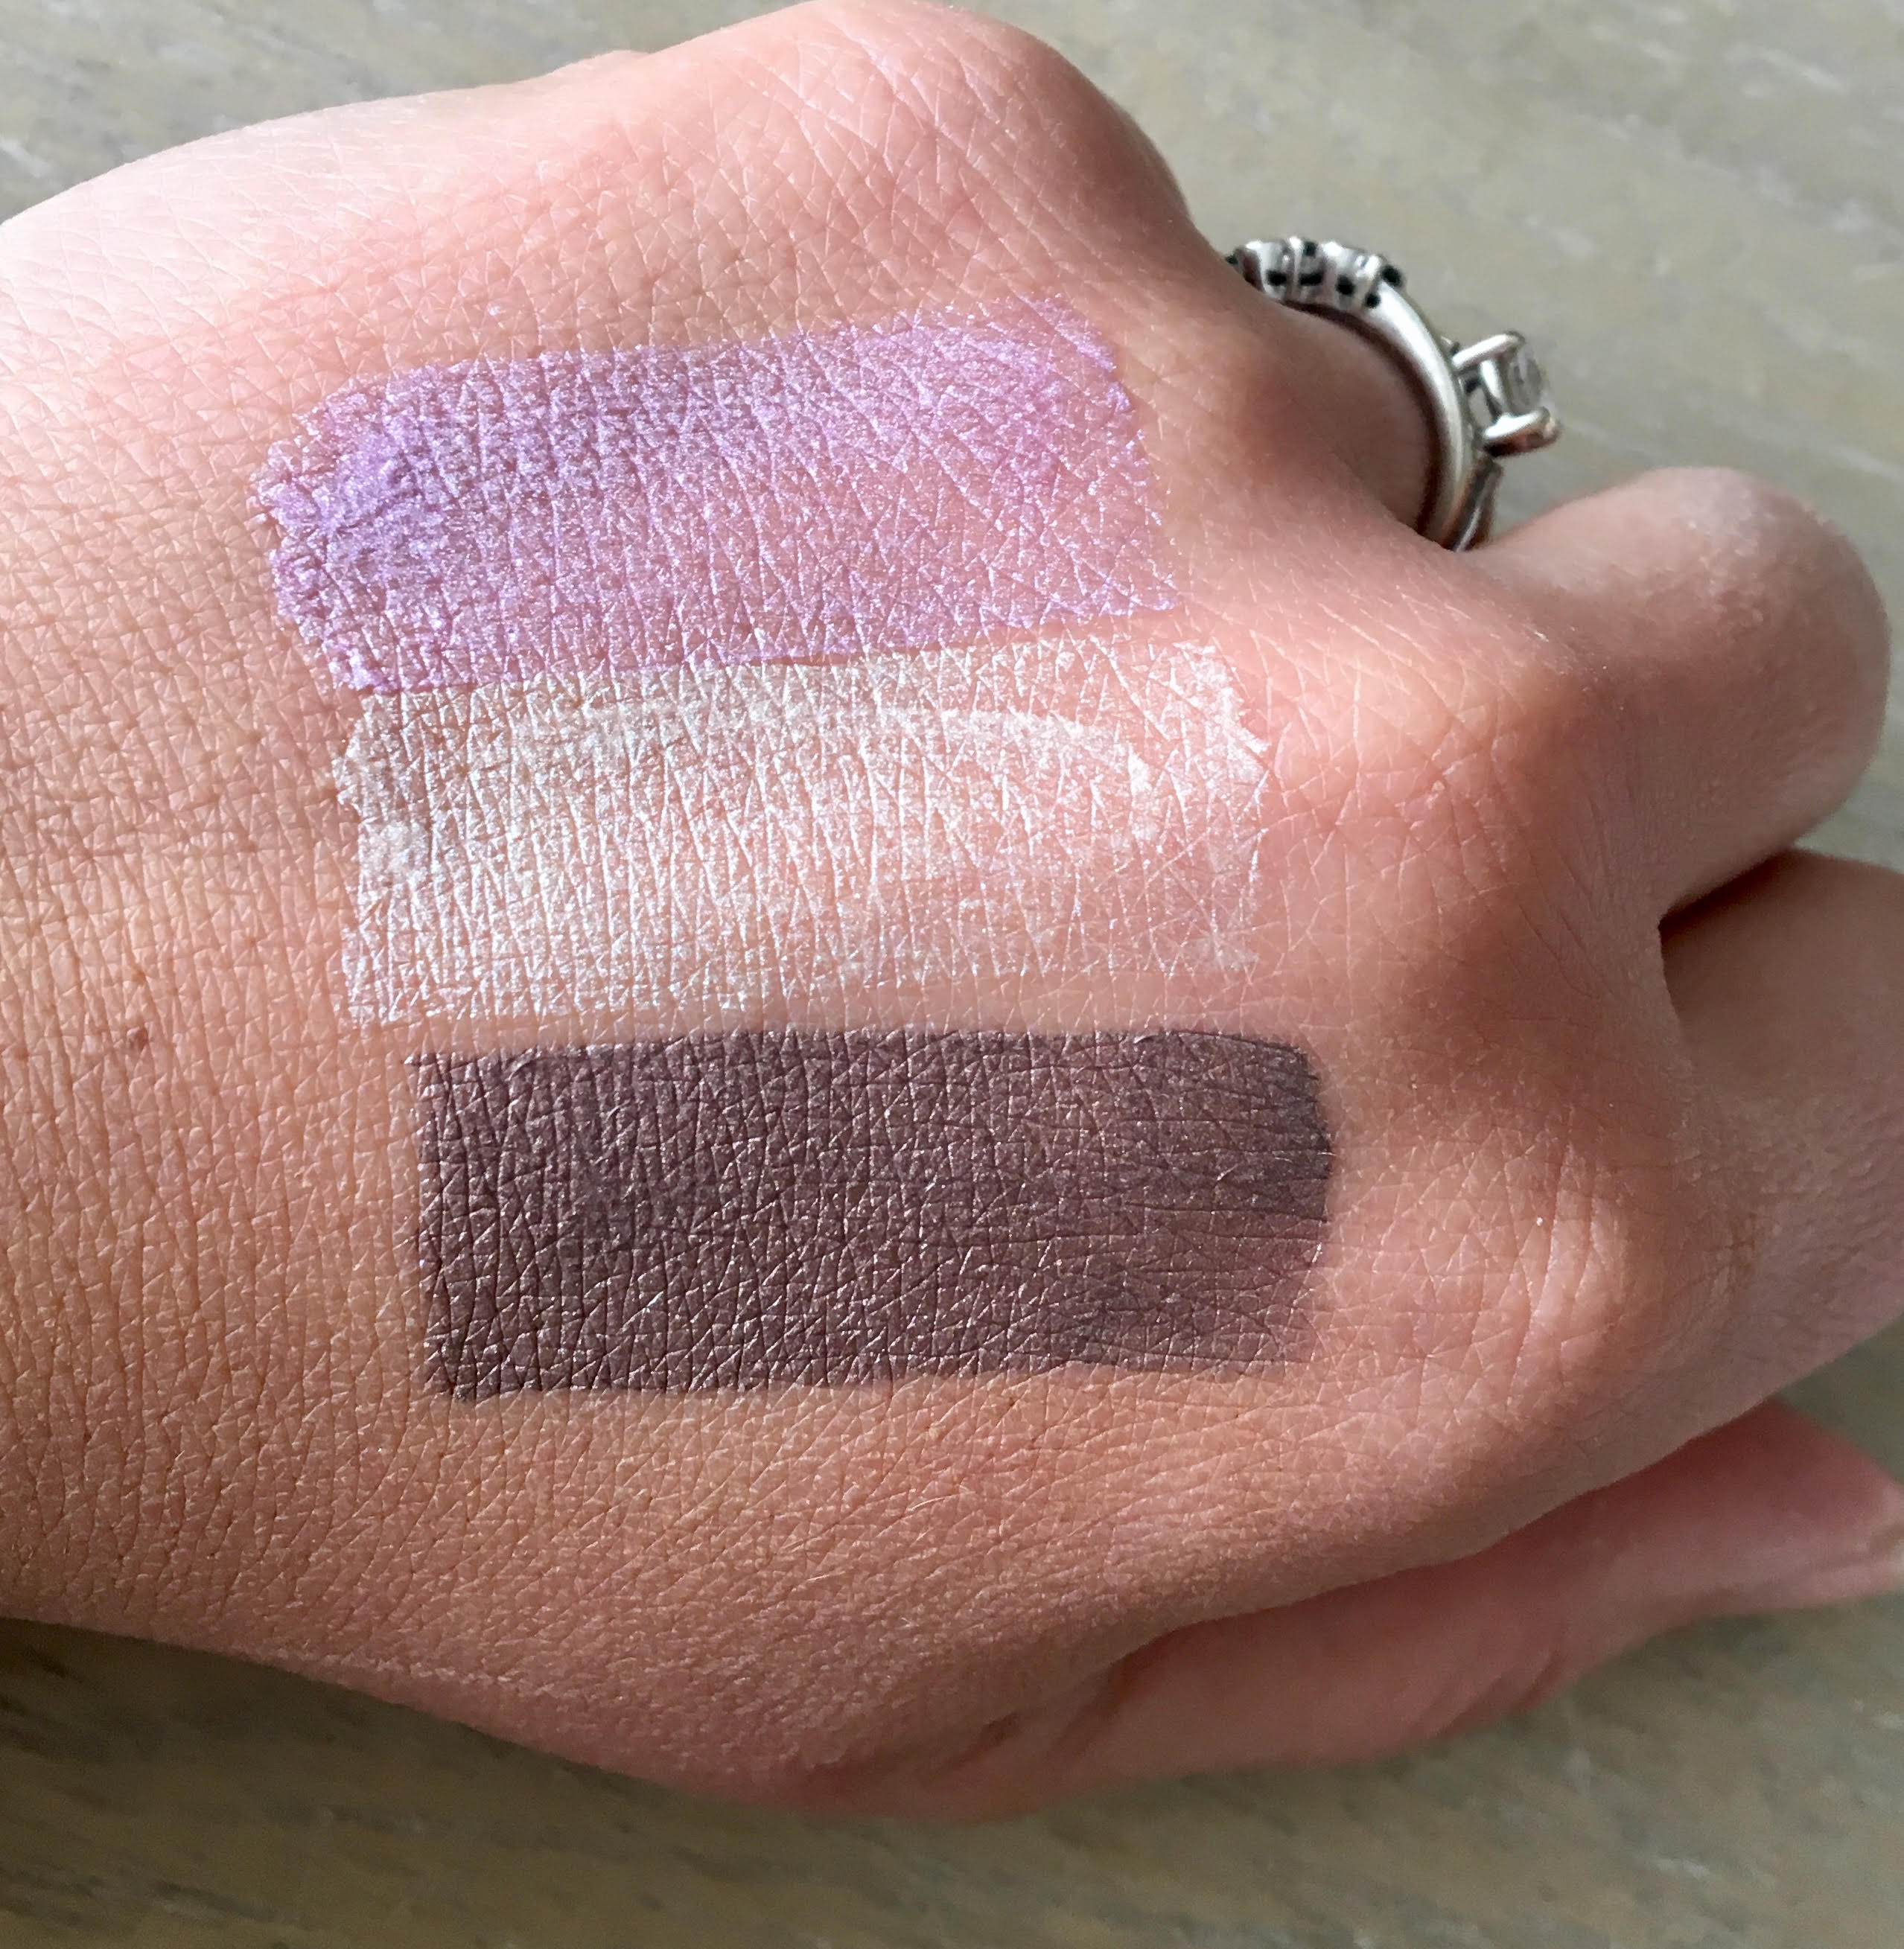 Glossier lidstar swatches